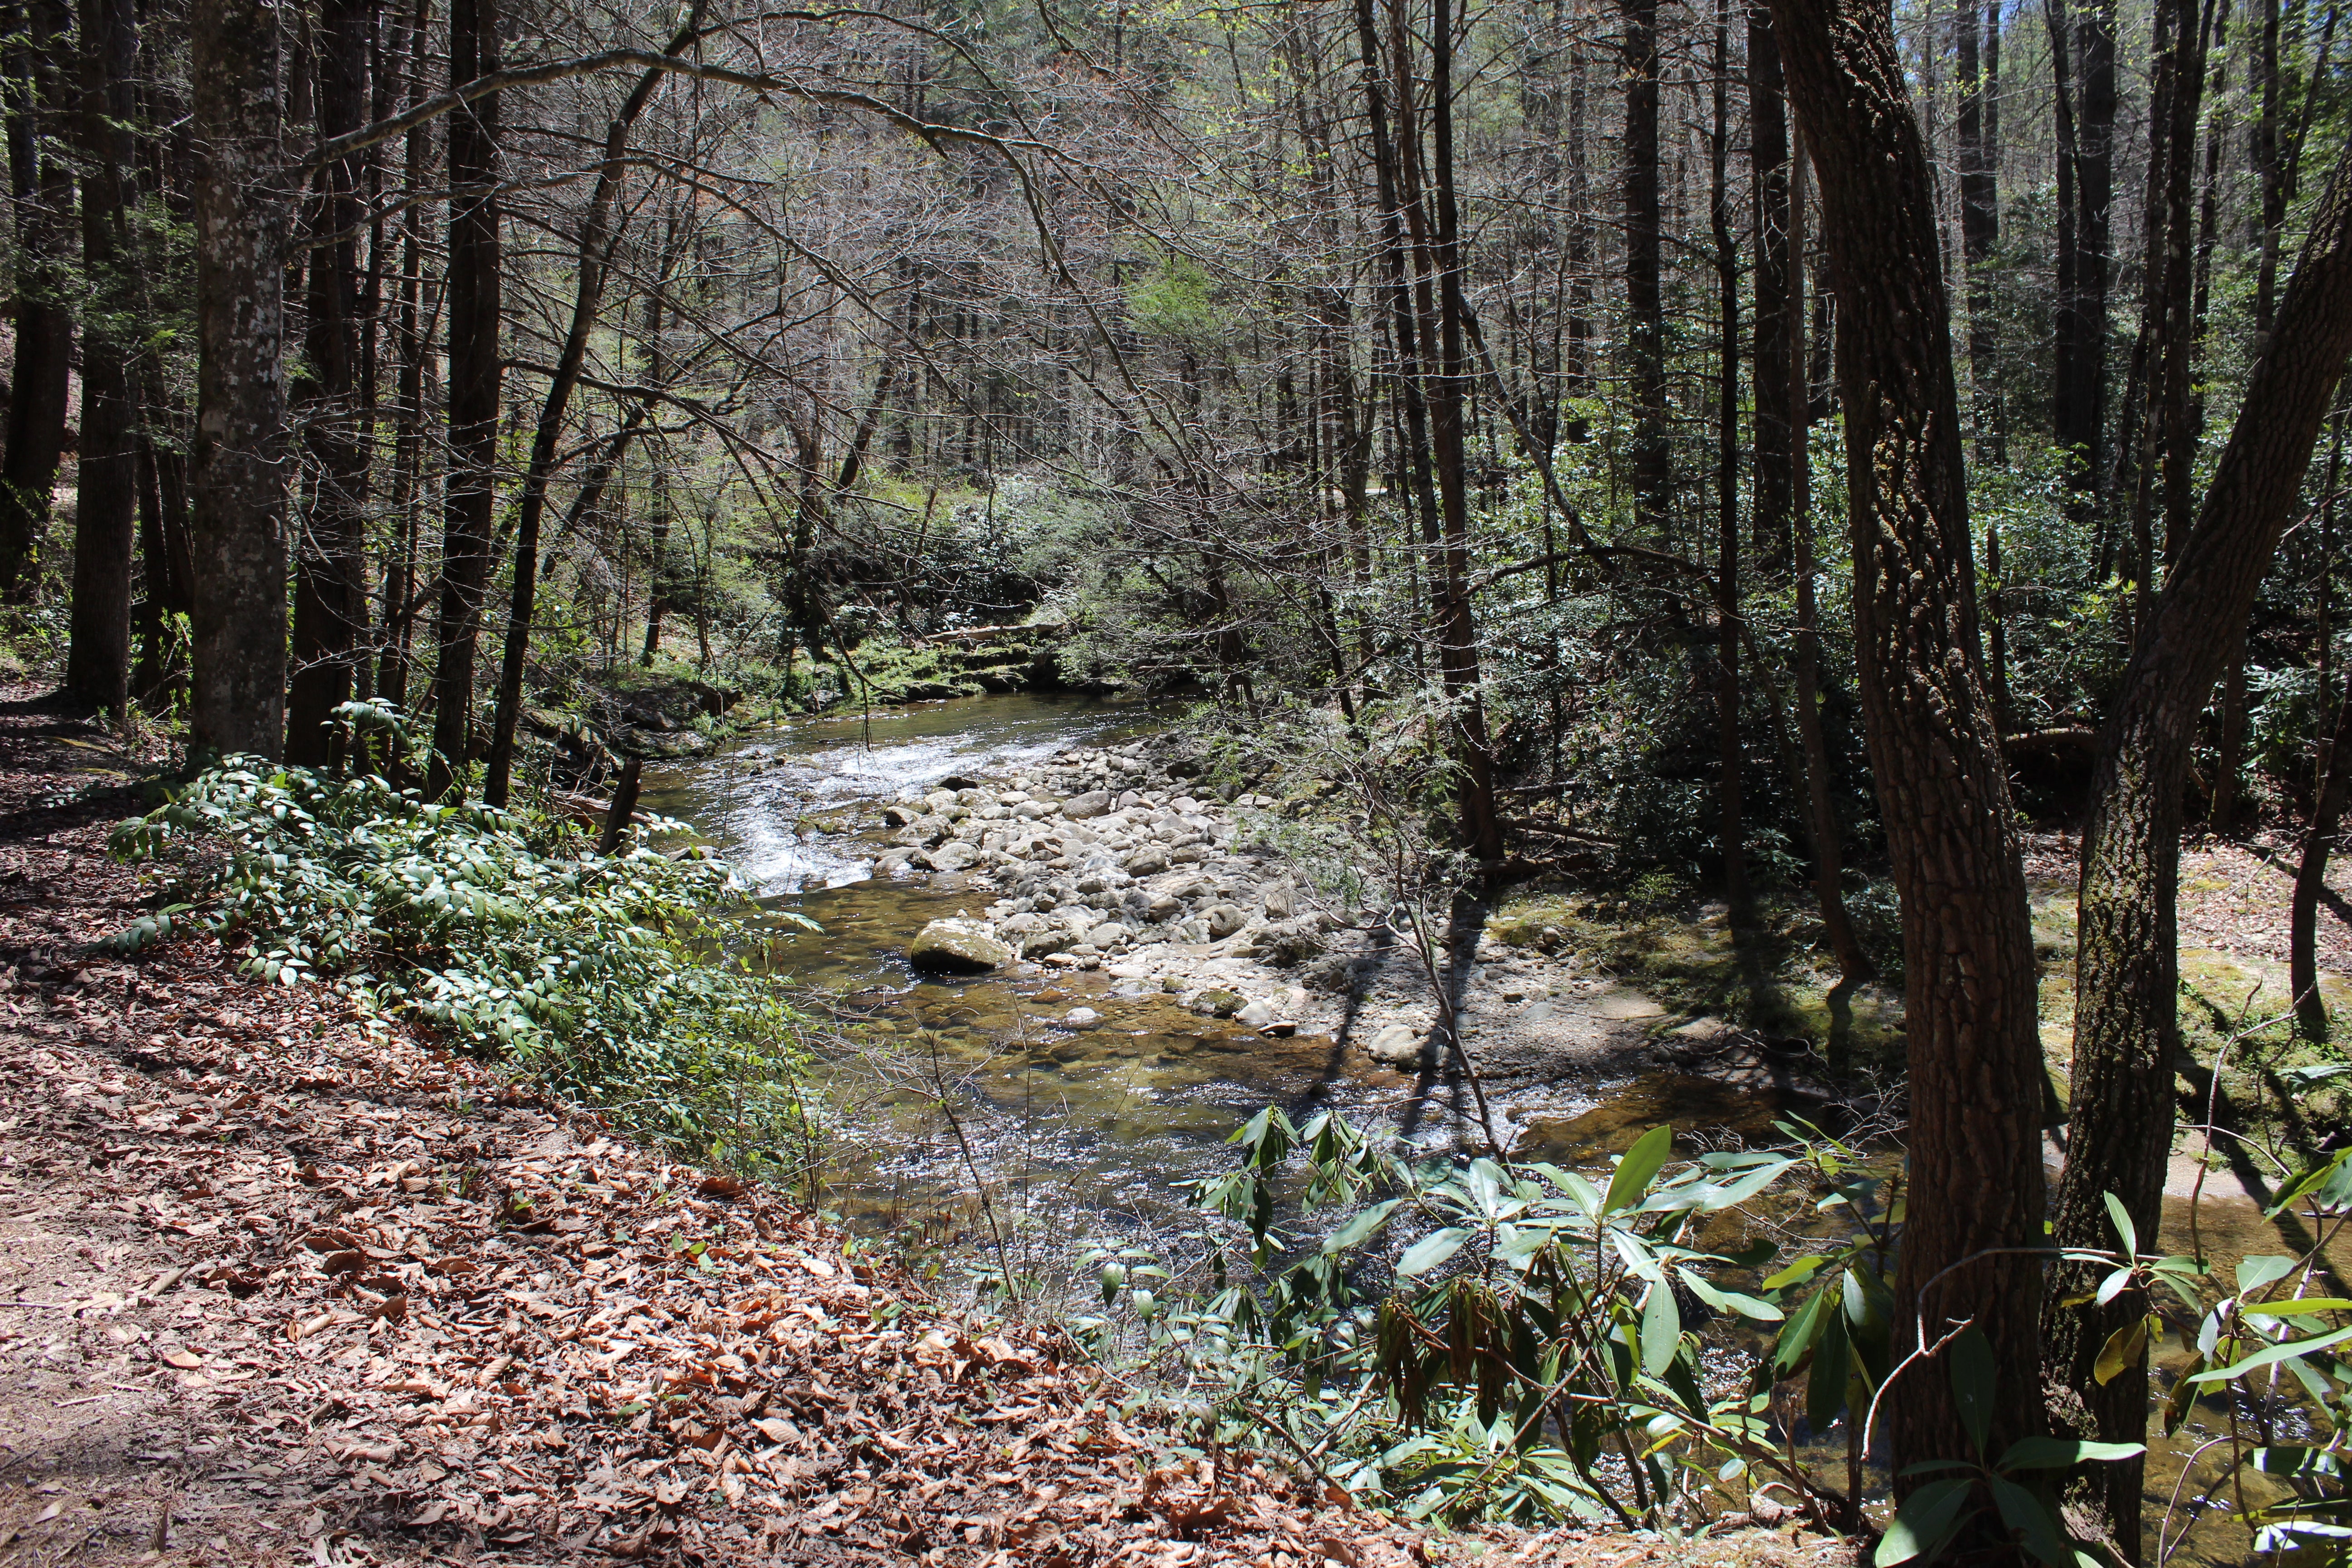 Camper submitted image from Upper Creek, Pisgah National Forest NC - 3